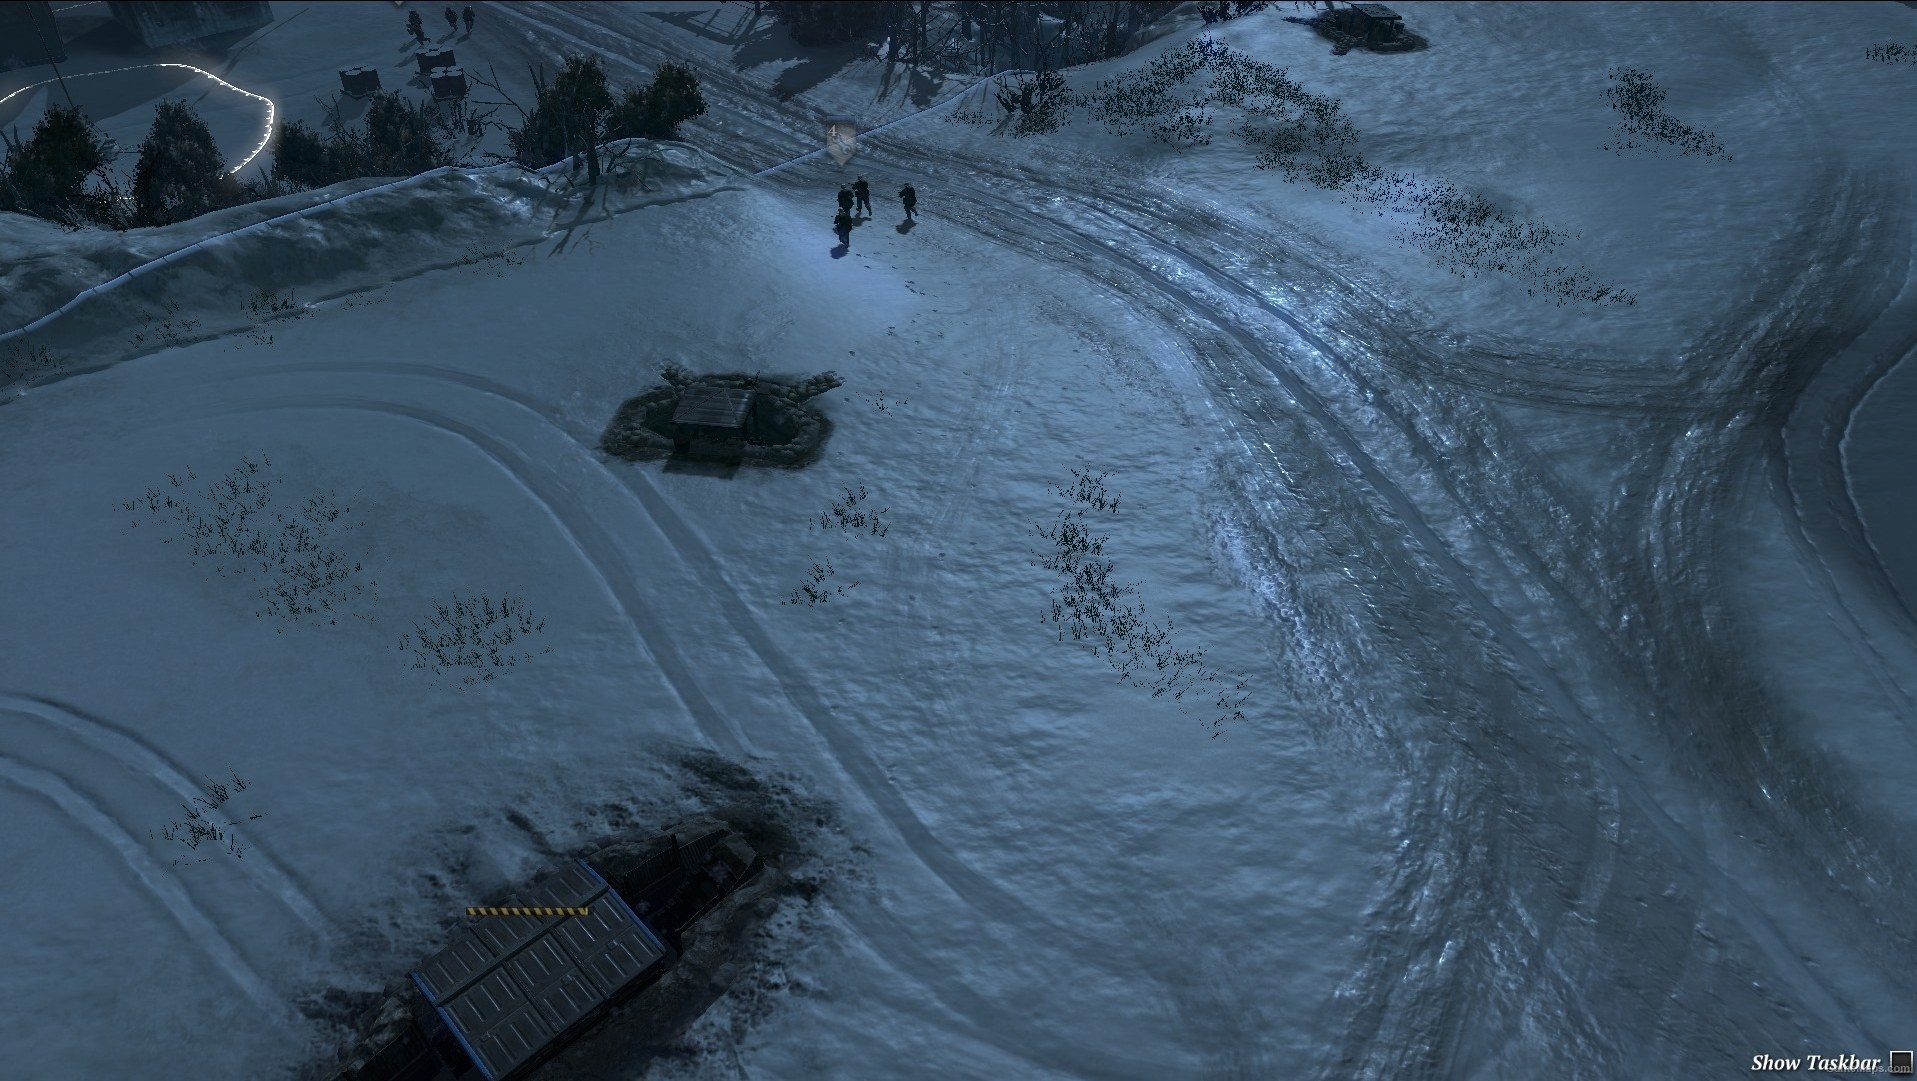 how to make company of heroes 2 maps